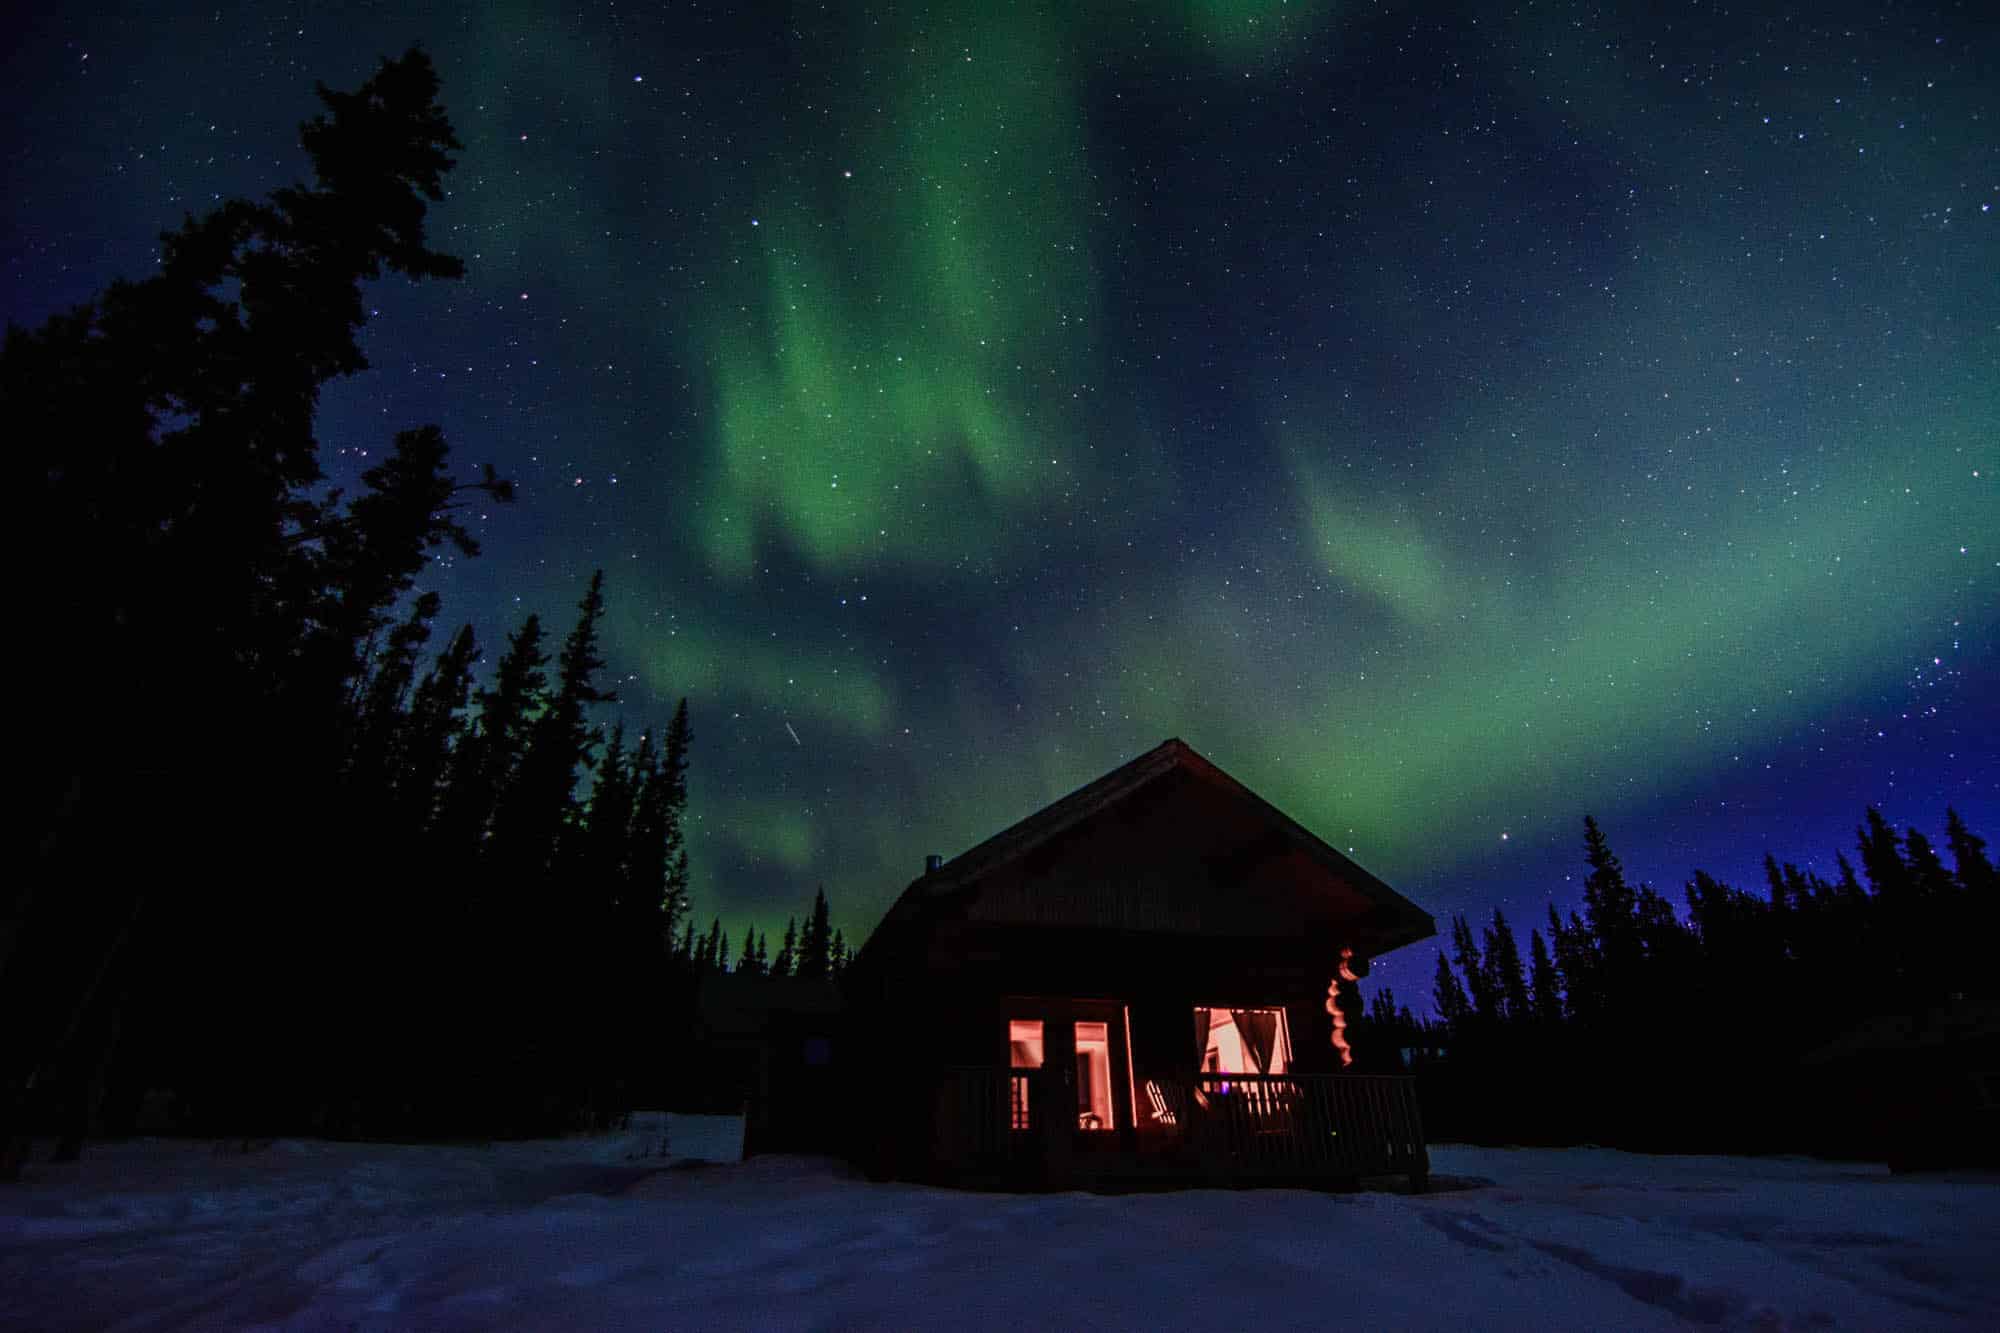 The Road Les Traveled captures the northern lights in yukon, canada